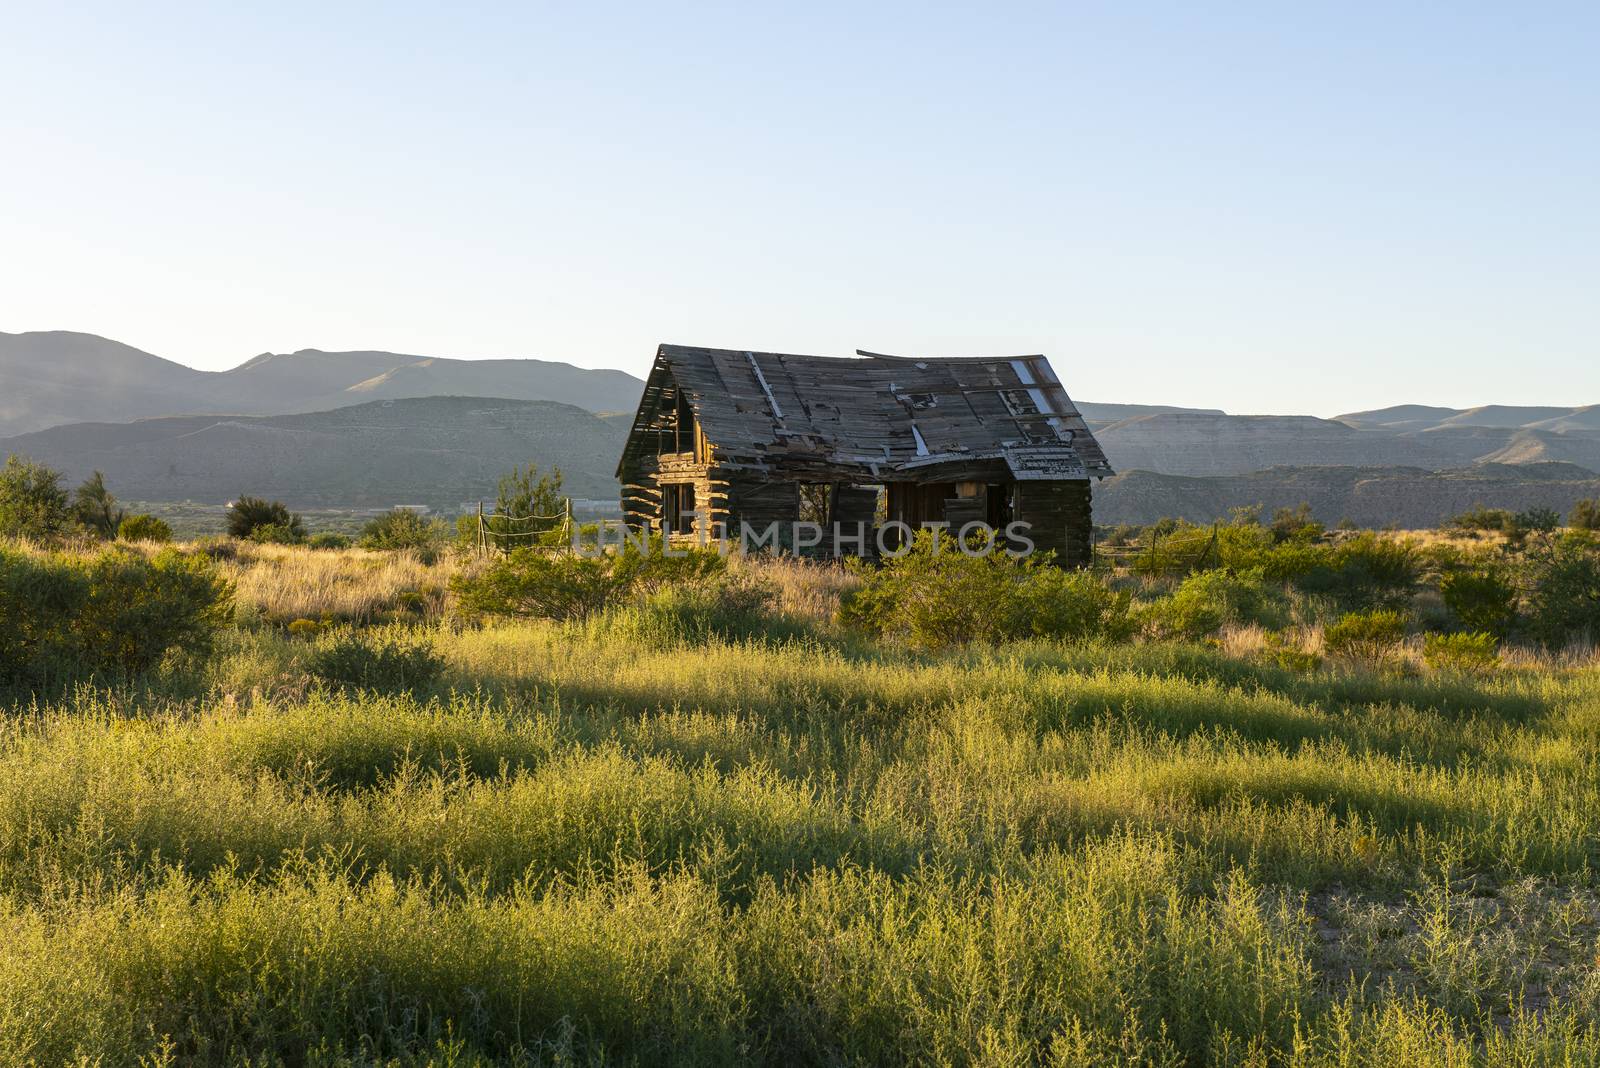 Abandoned wood cabin in Dead Horse Ranch State Park, Arizona by Njean